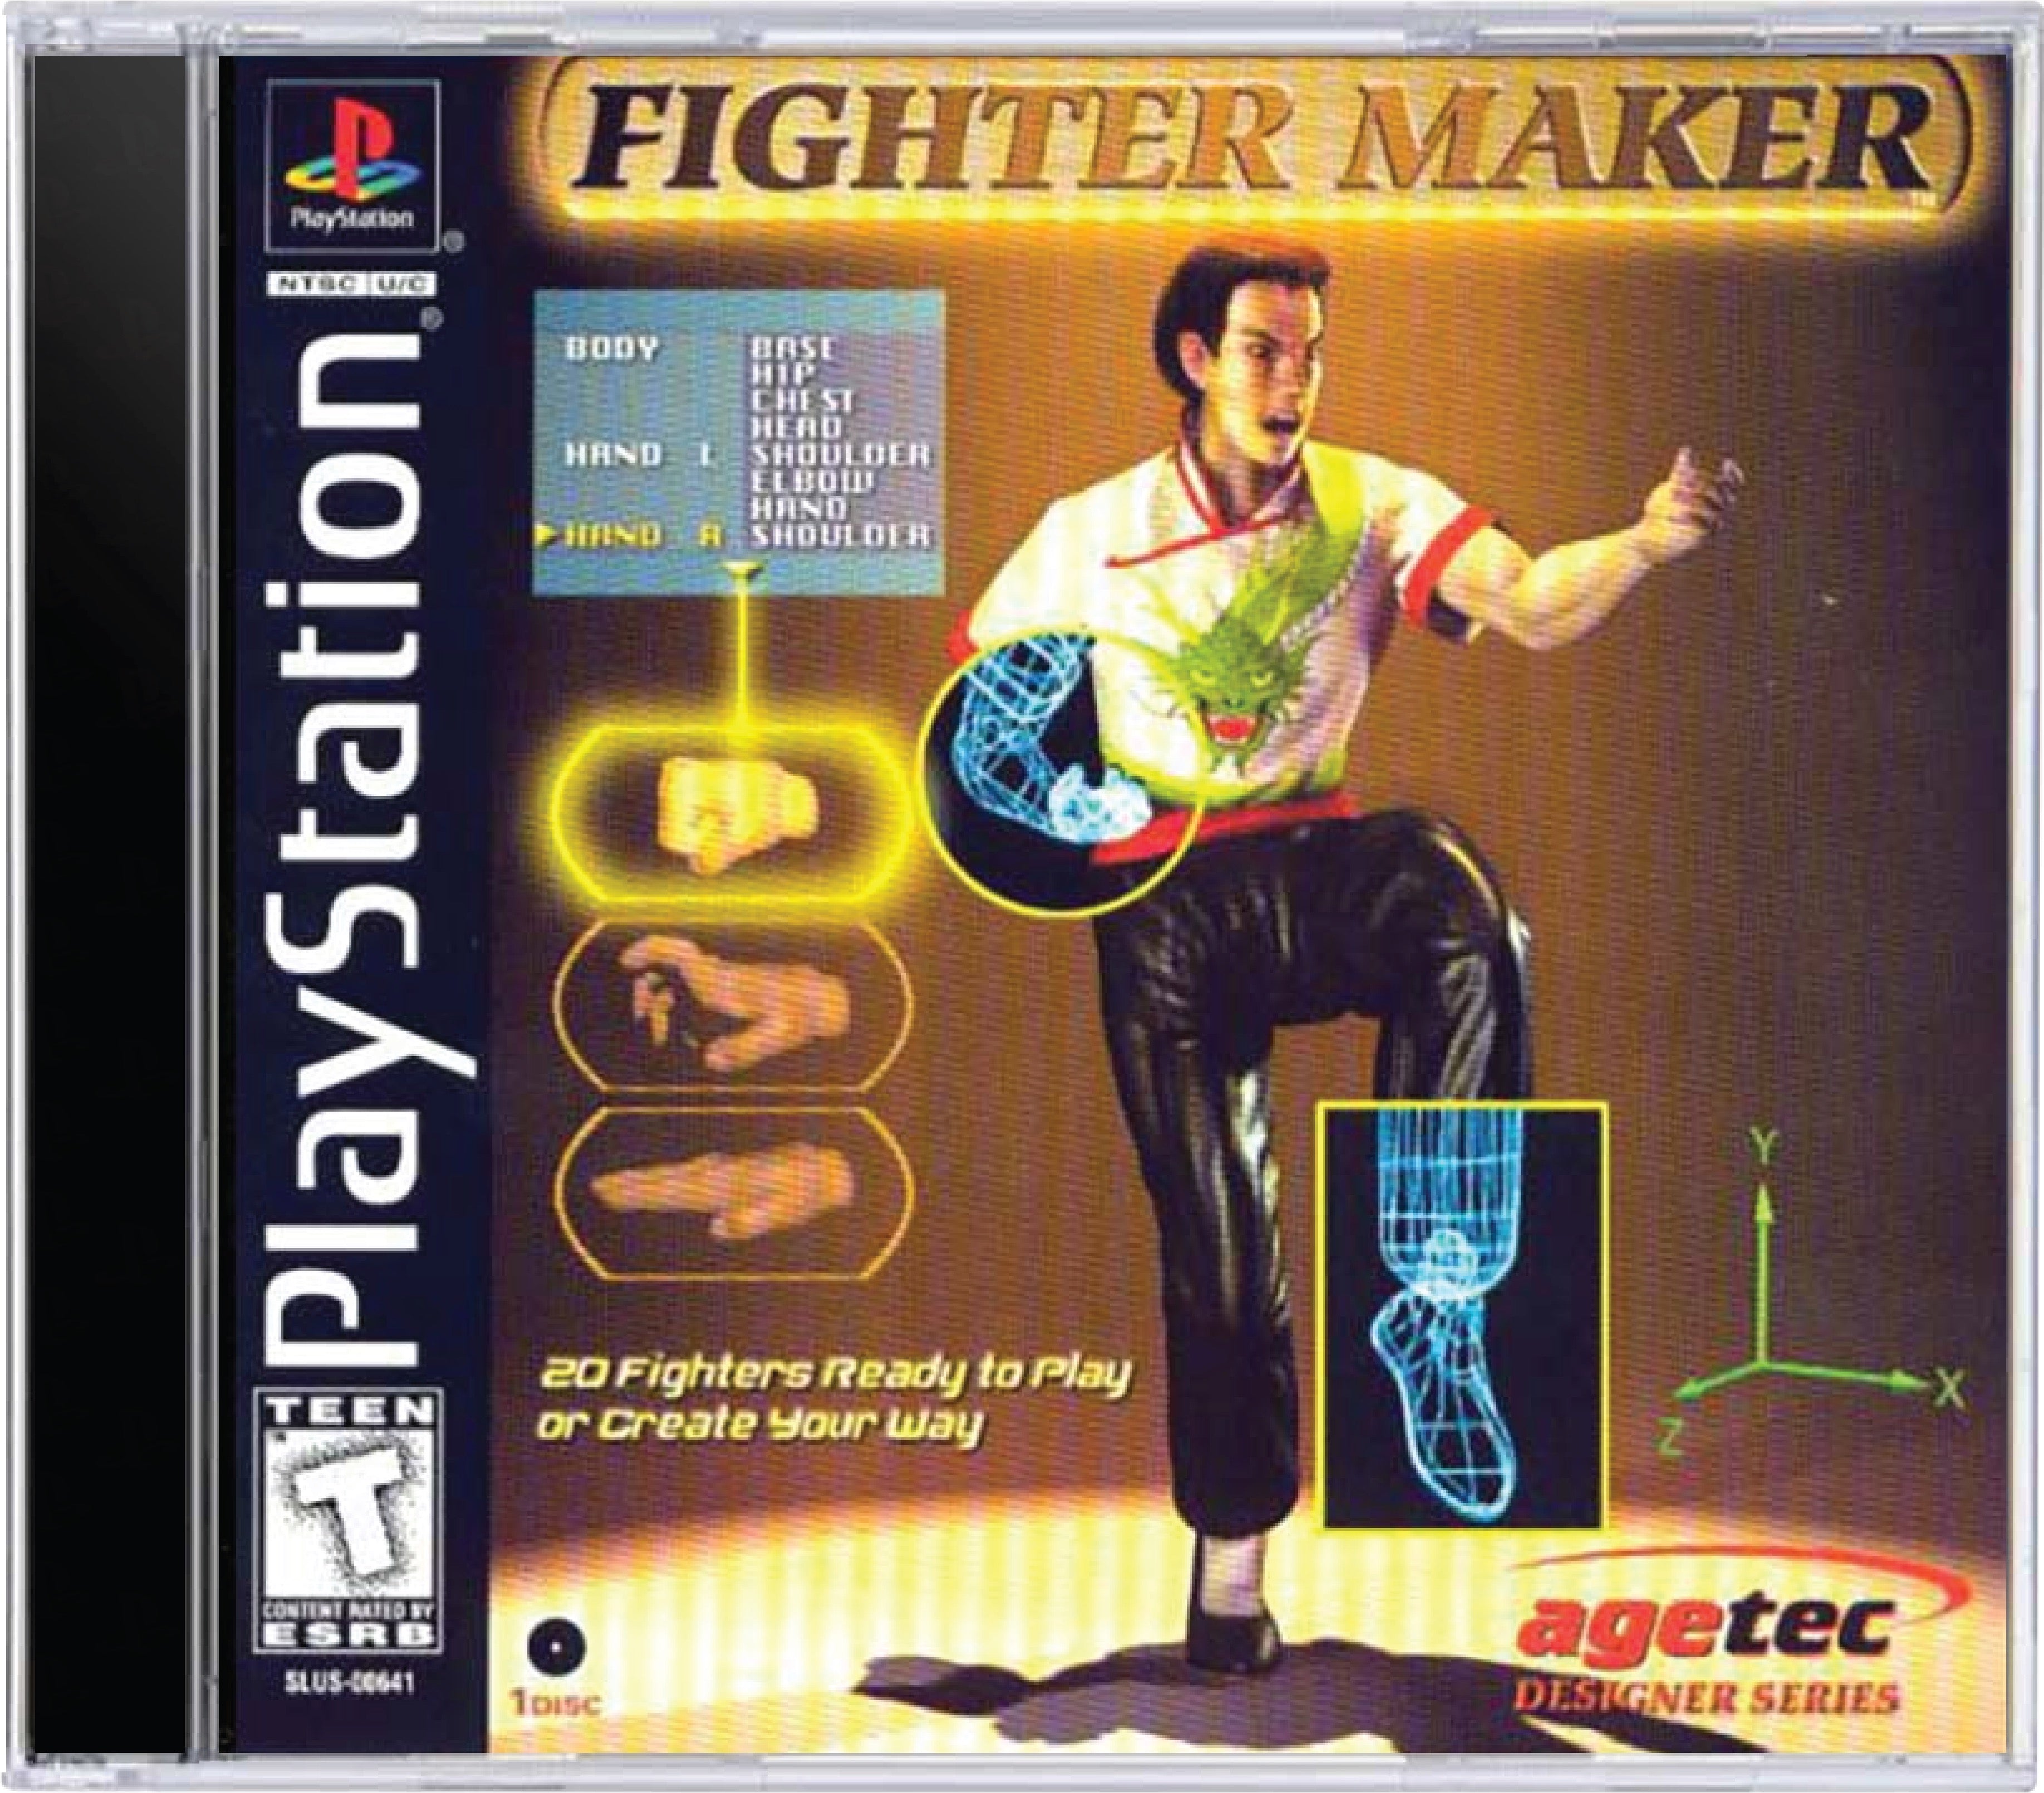 Fighter Maker Cover Art and Product Photo